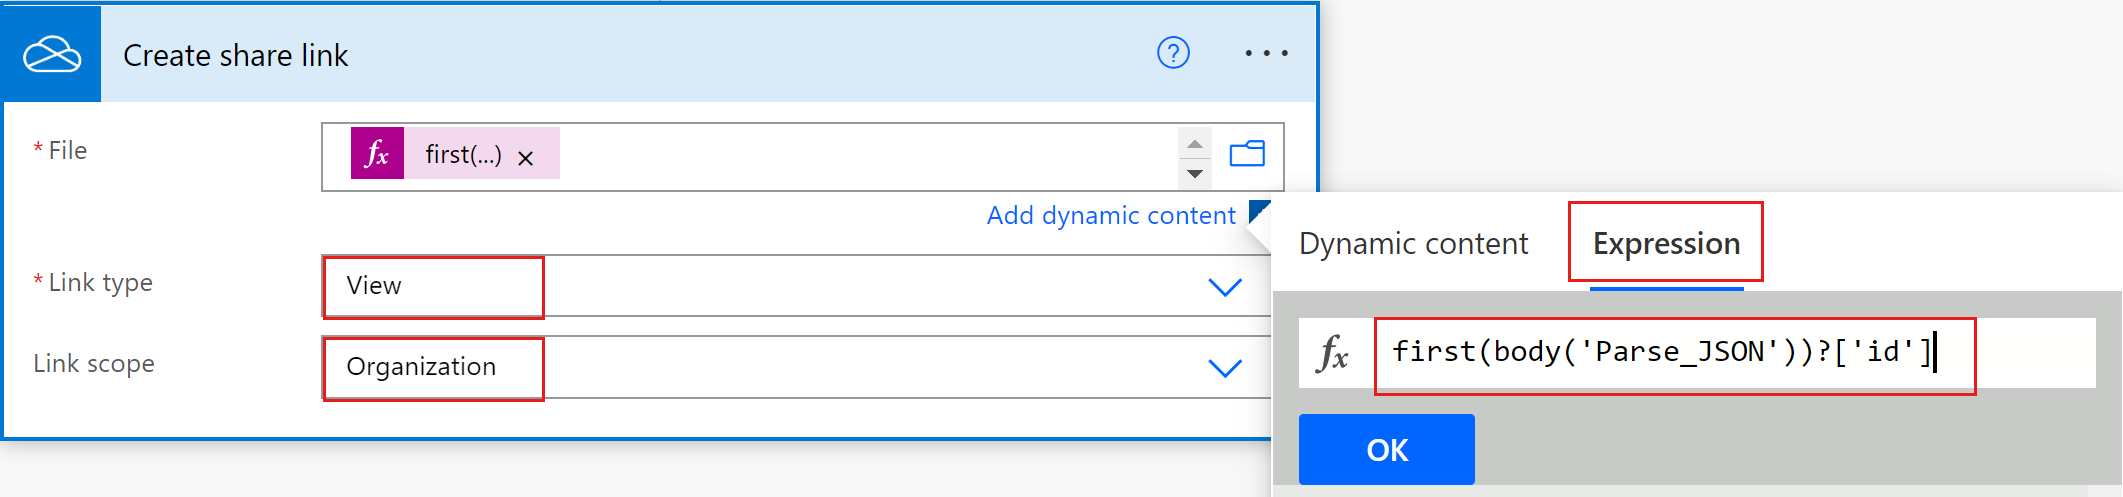 Screenshot of a OneDrive Create share link action in a flow under construction, with the form's uploaded file, link type, and link scope highlighted.